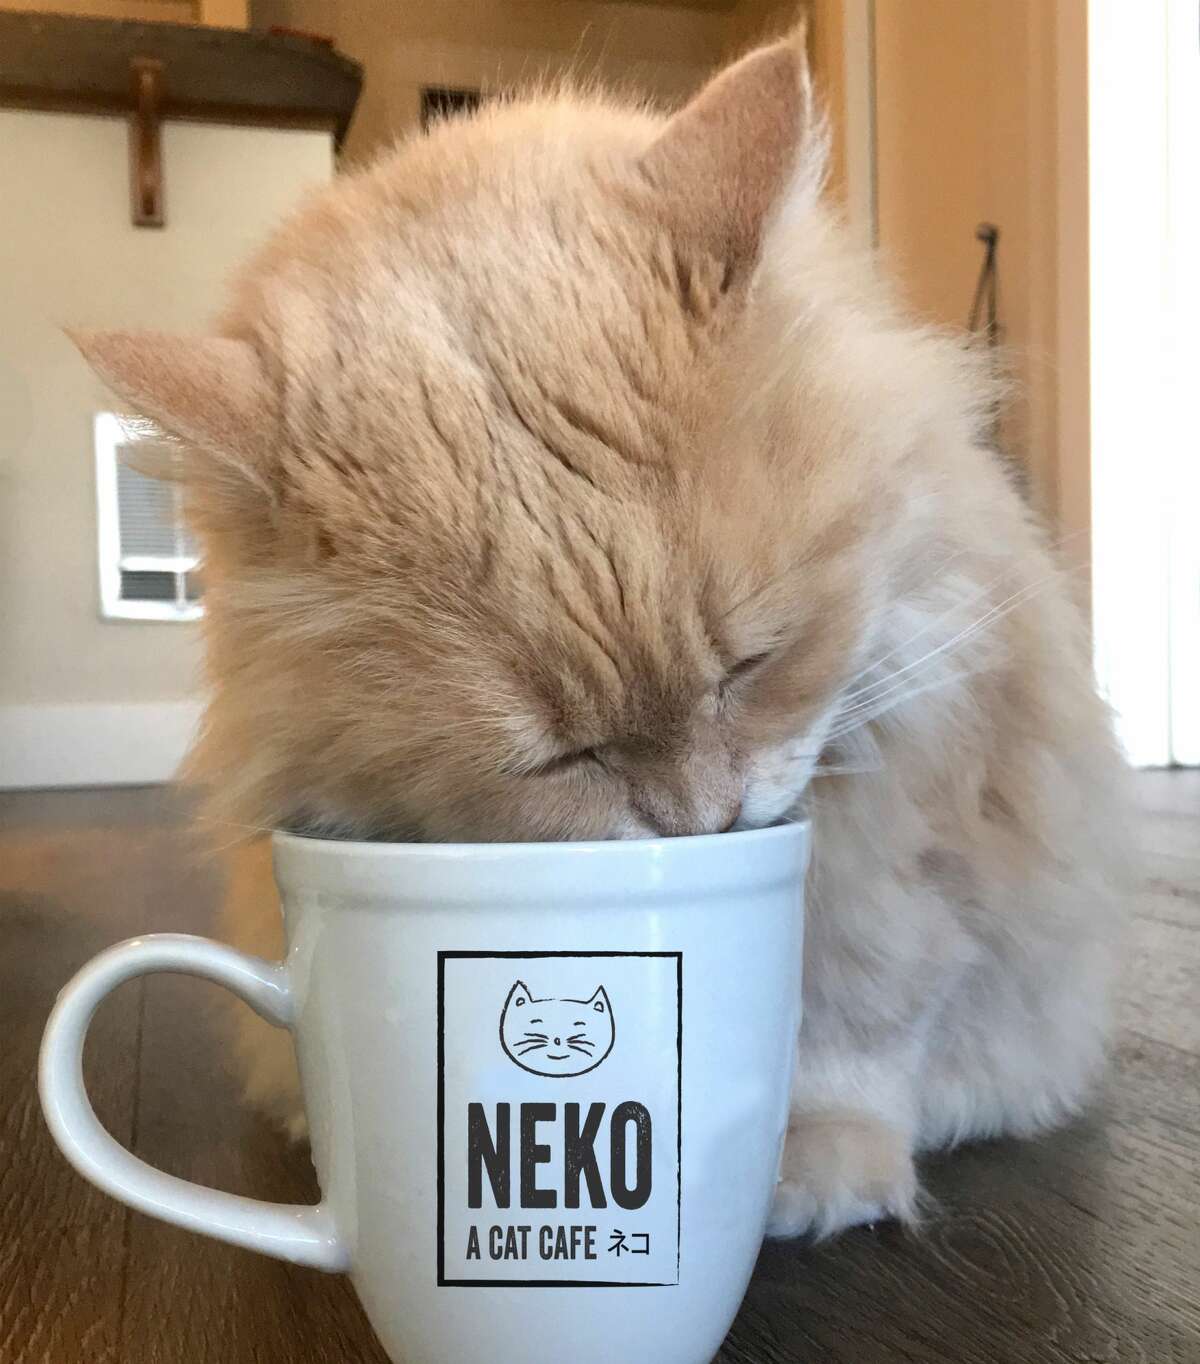 Neko Cafe will open for business this summer in a 1,022 square foot space on Pine Street. 